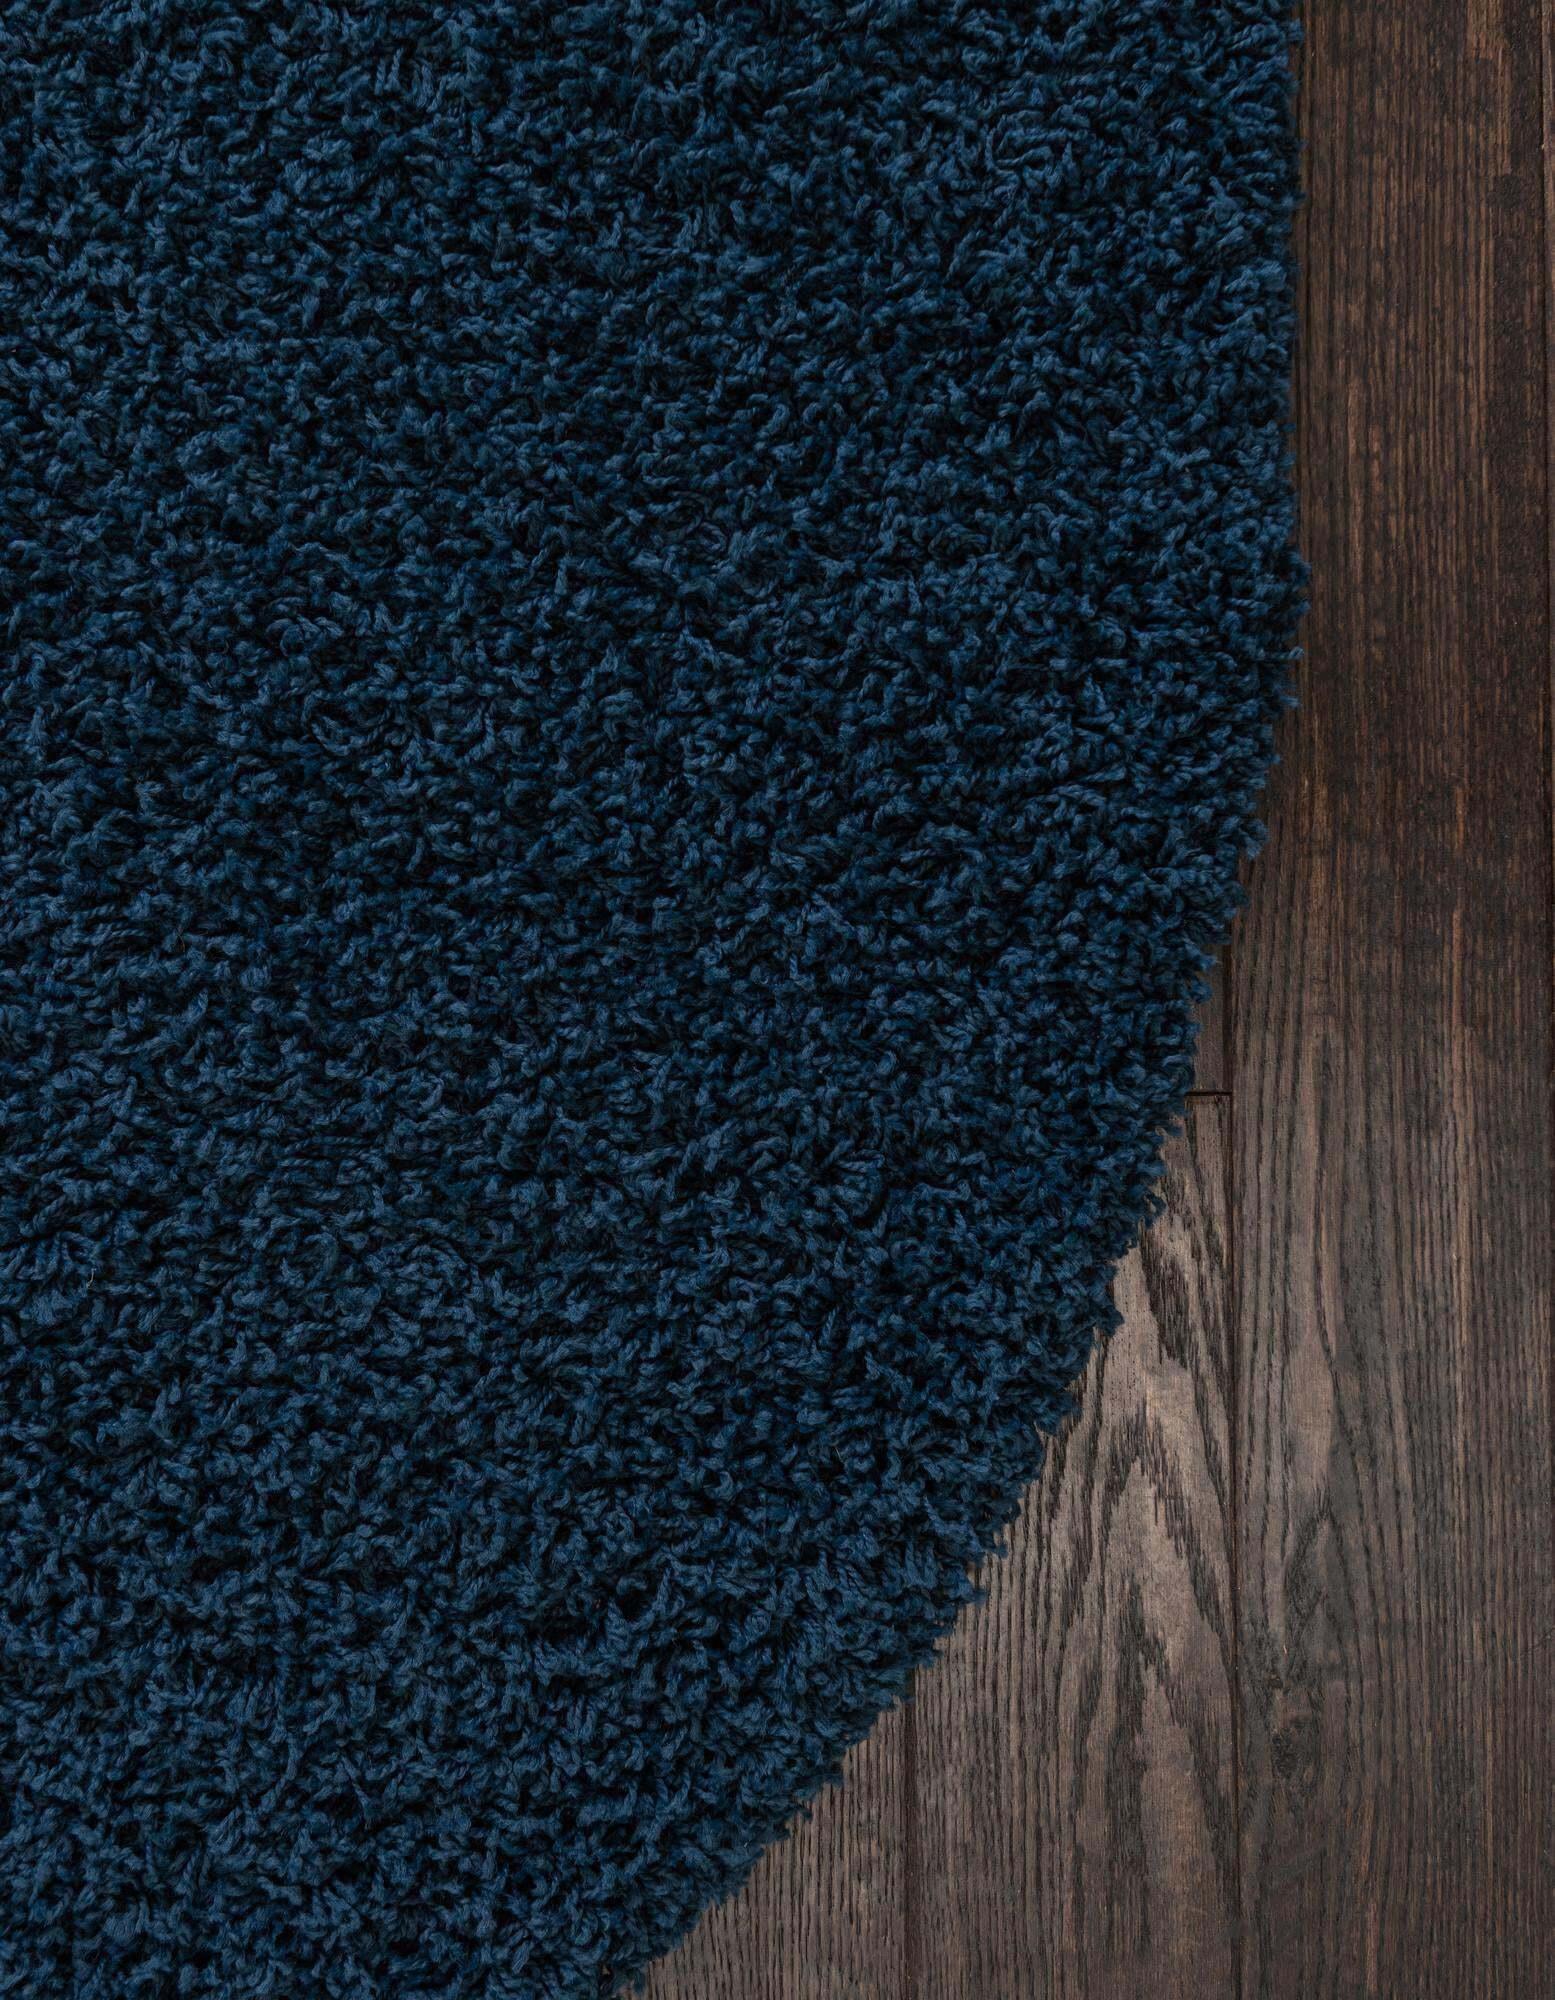 Unique Loom Indoor Rugs - Solid Shag Solid Oval 8x10 Oval Rug Navy Blue